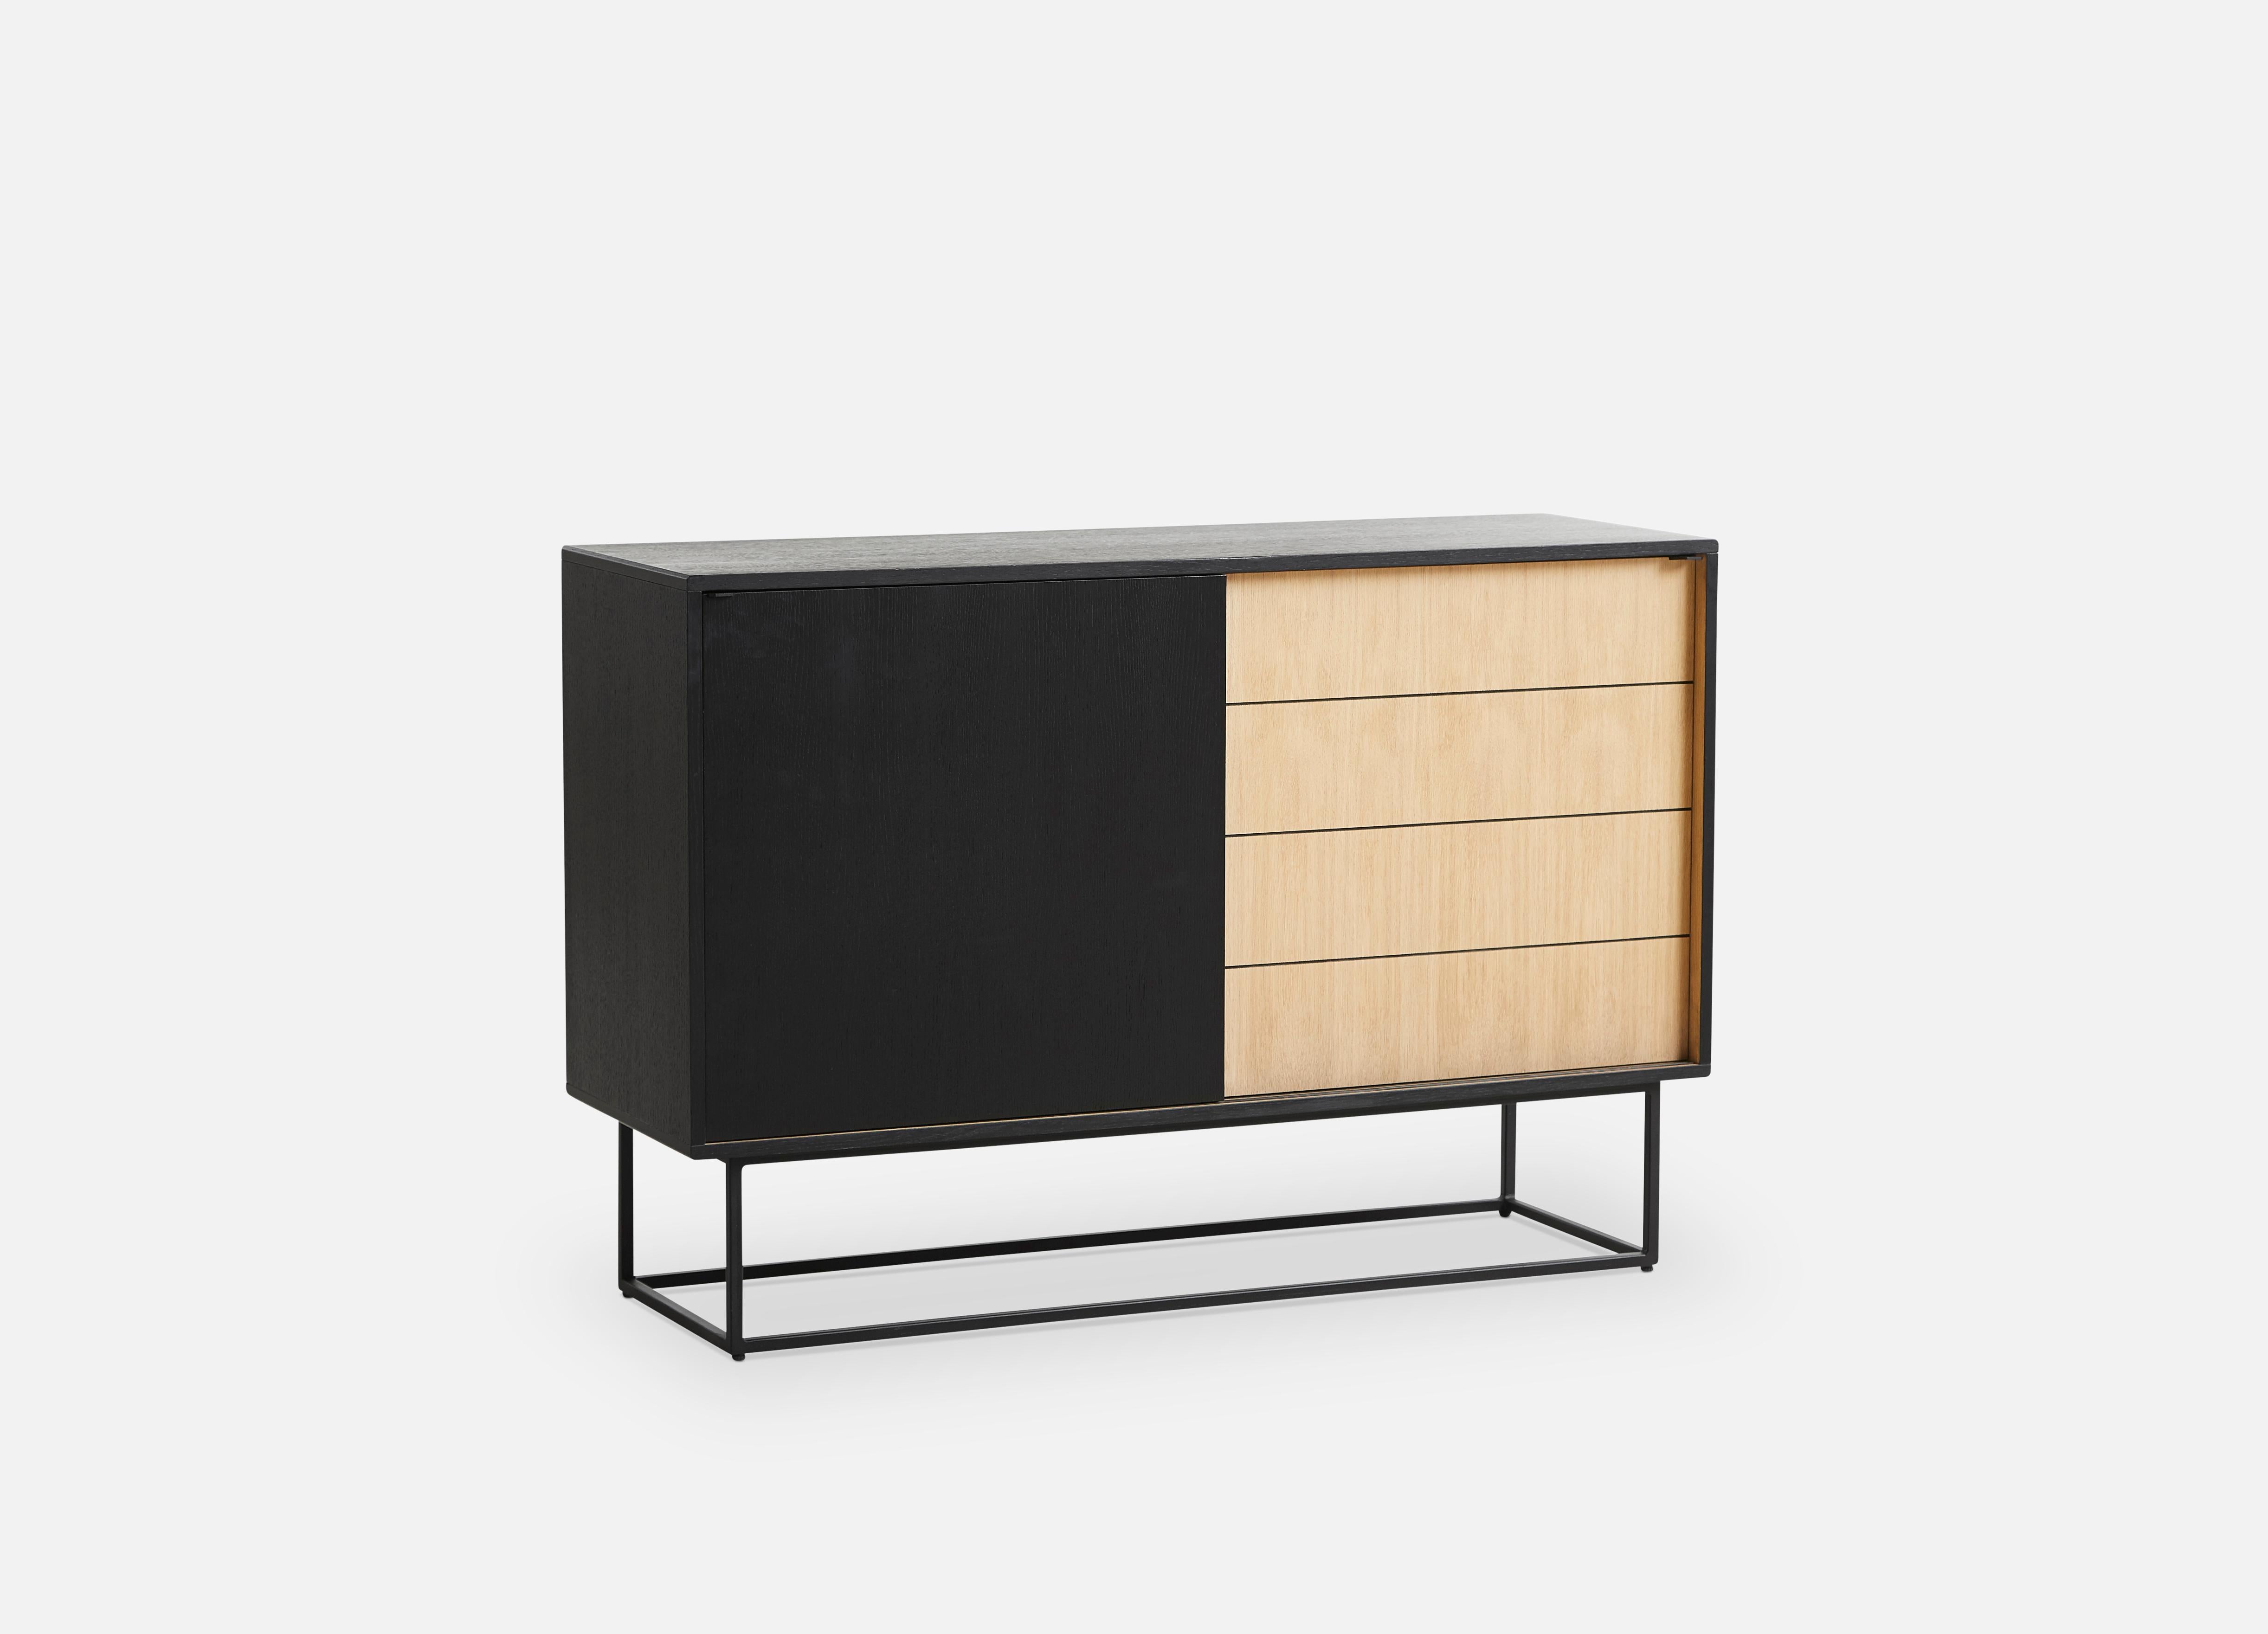 Black and white oak Virka high sideboard by Ropke Design and Moaak
Materials: oak, metal.
Dimensions: D 40 x W 120 x H 82 cm
Also available in different colours and materials.

The founders, Mia and Torben Koed, decided to put their 30 years of